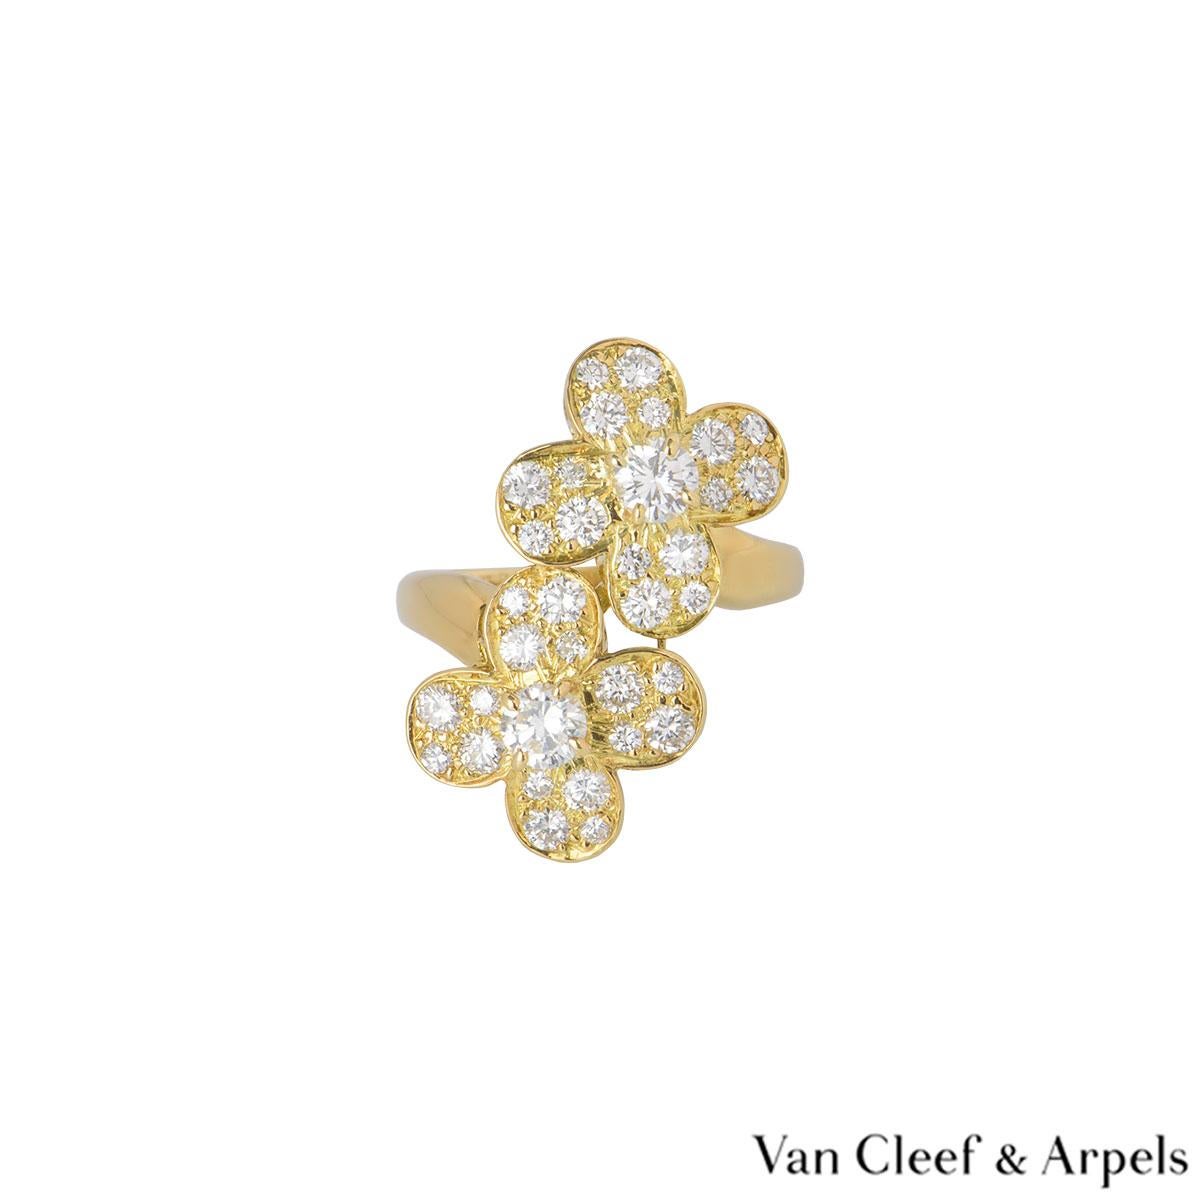 A beautiful 18k yellow gold Van Cleef & Arpels diamond ring from the Trefle collection. The ring comprises of a double 4 petal flower motifs with a round brilliant cut diamond in the centre of each. Complementing the motif are 32 round brilliant cut